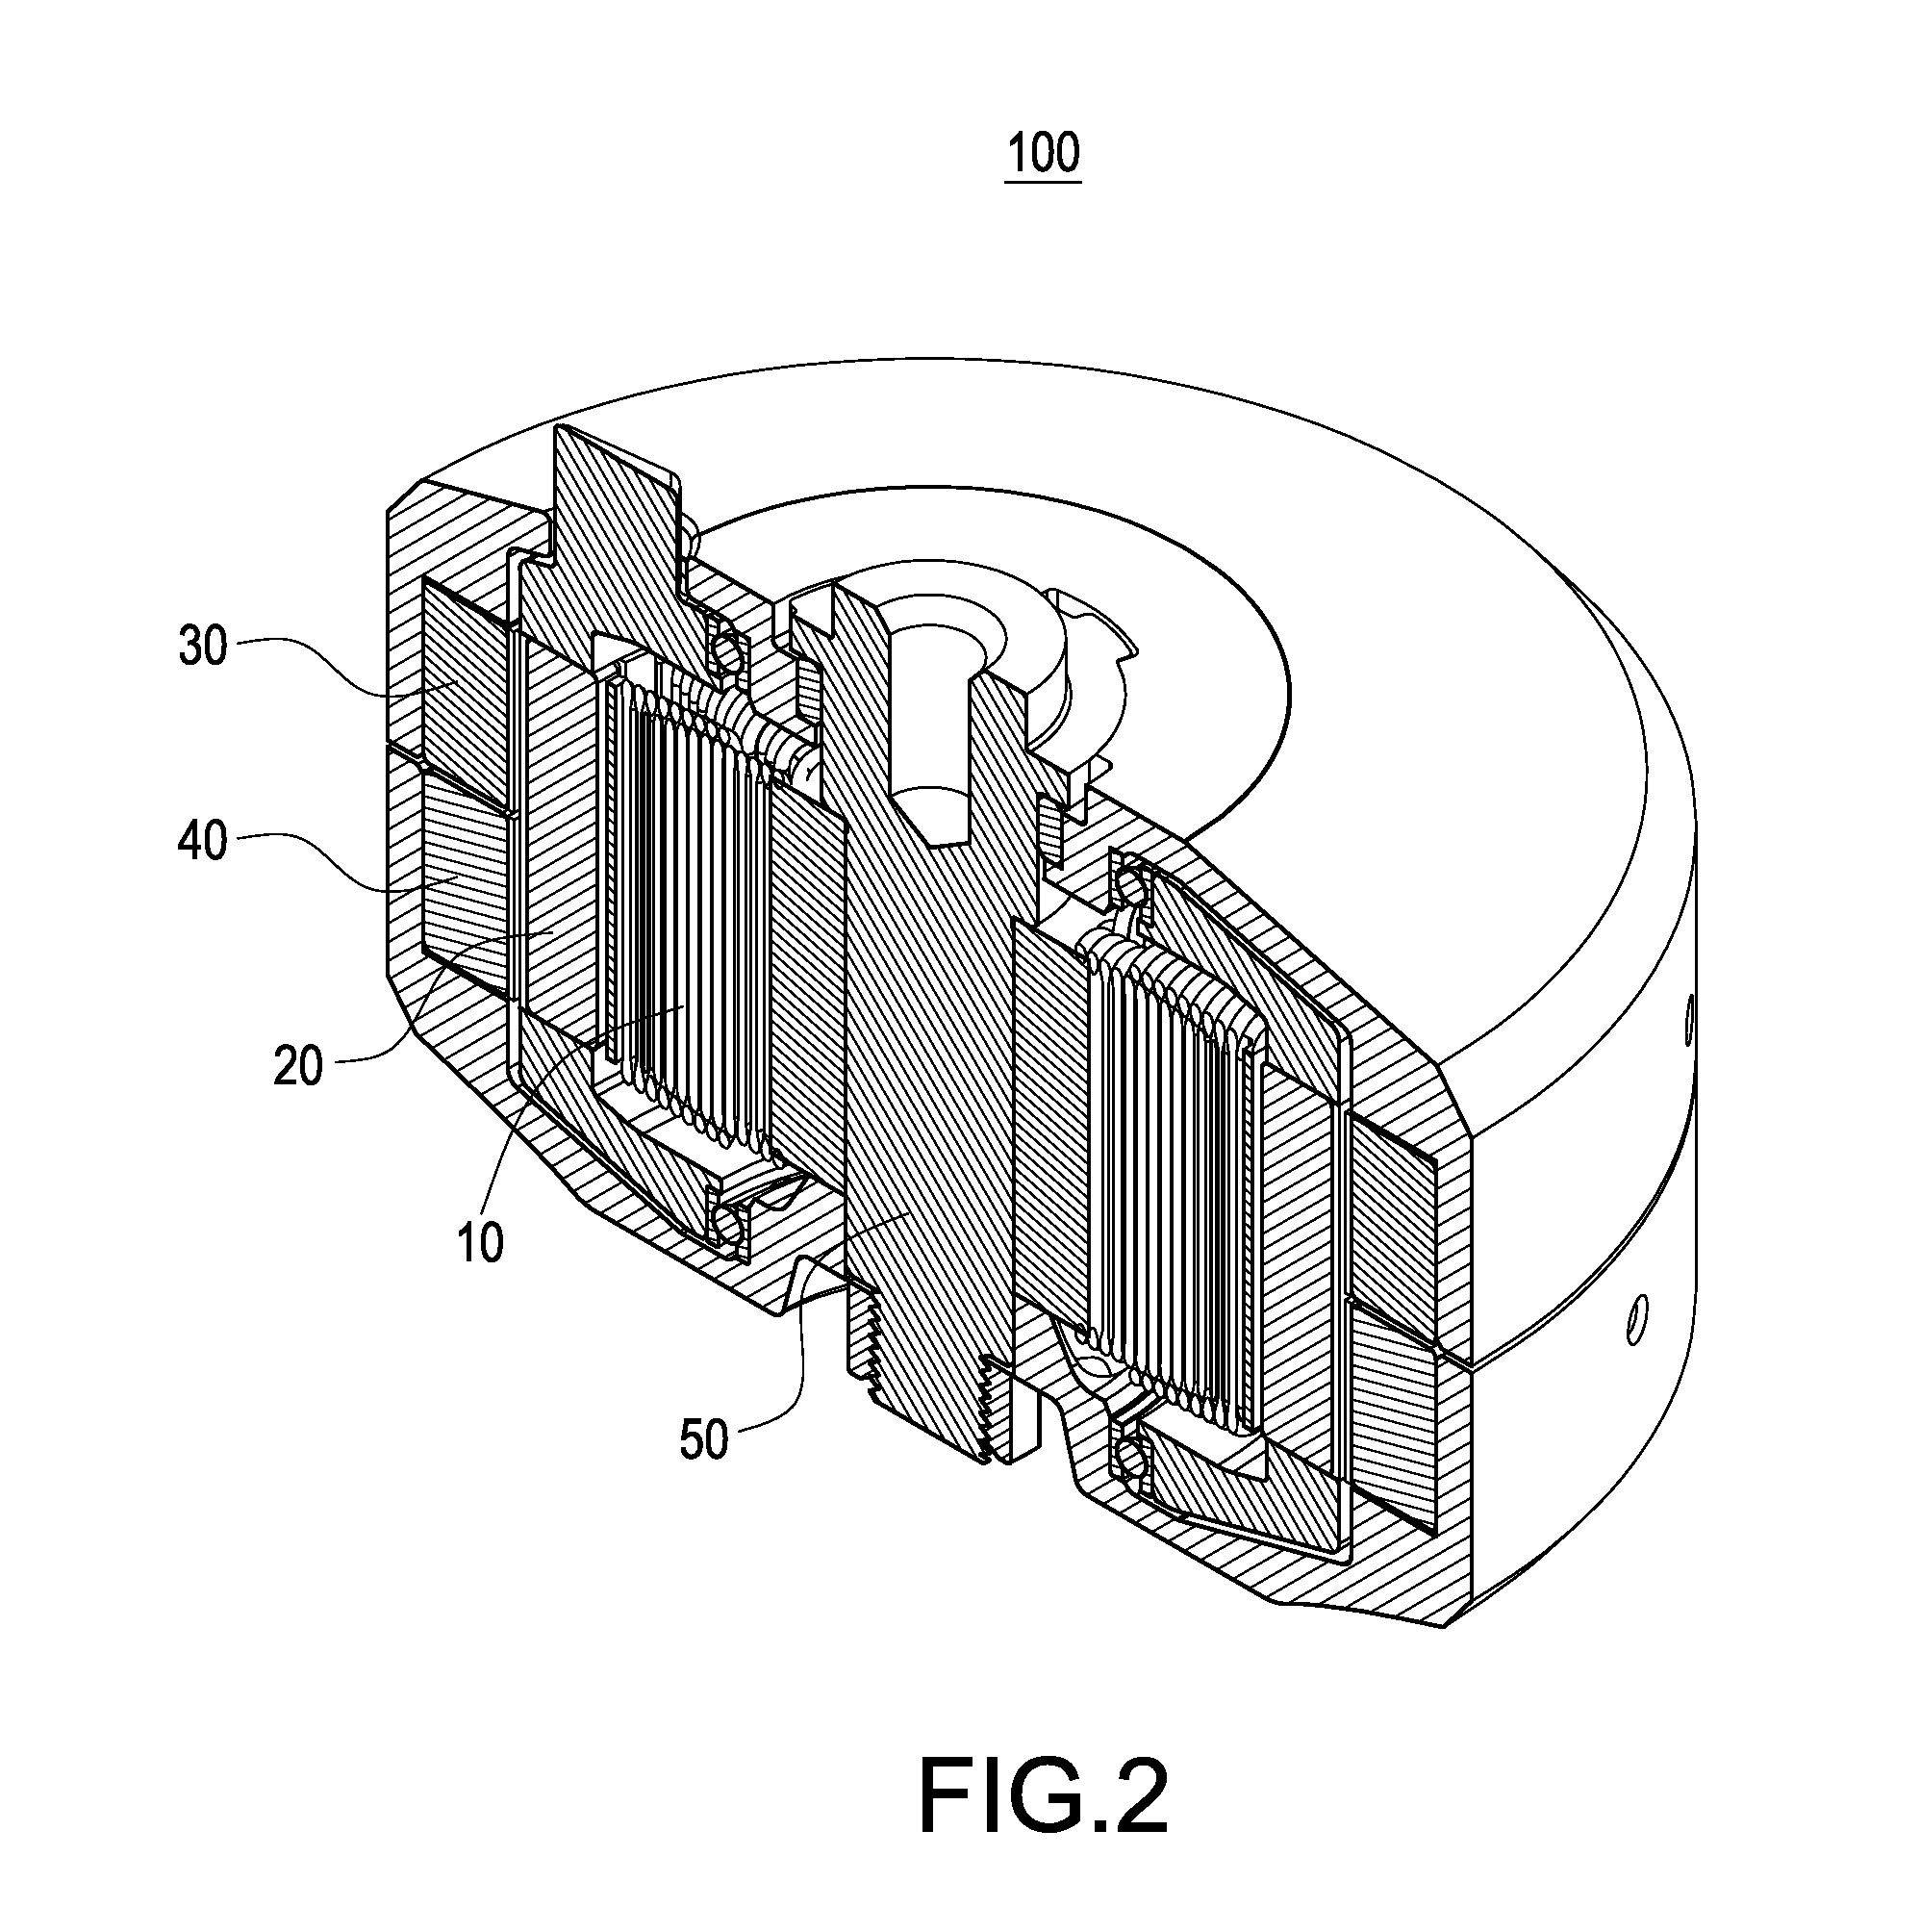 Magnetic-controlled actuator with auto-locking function for joints of manipulation arm